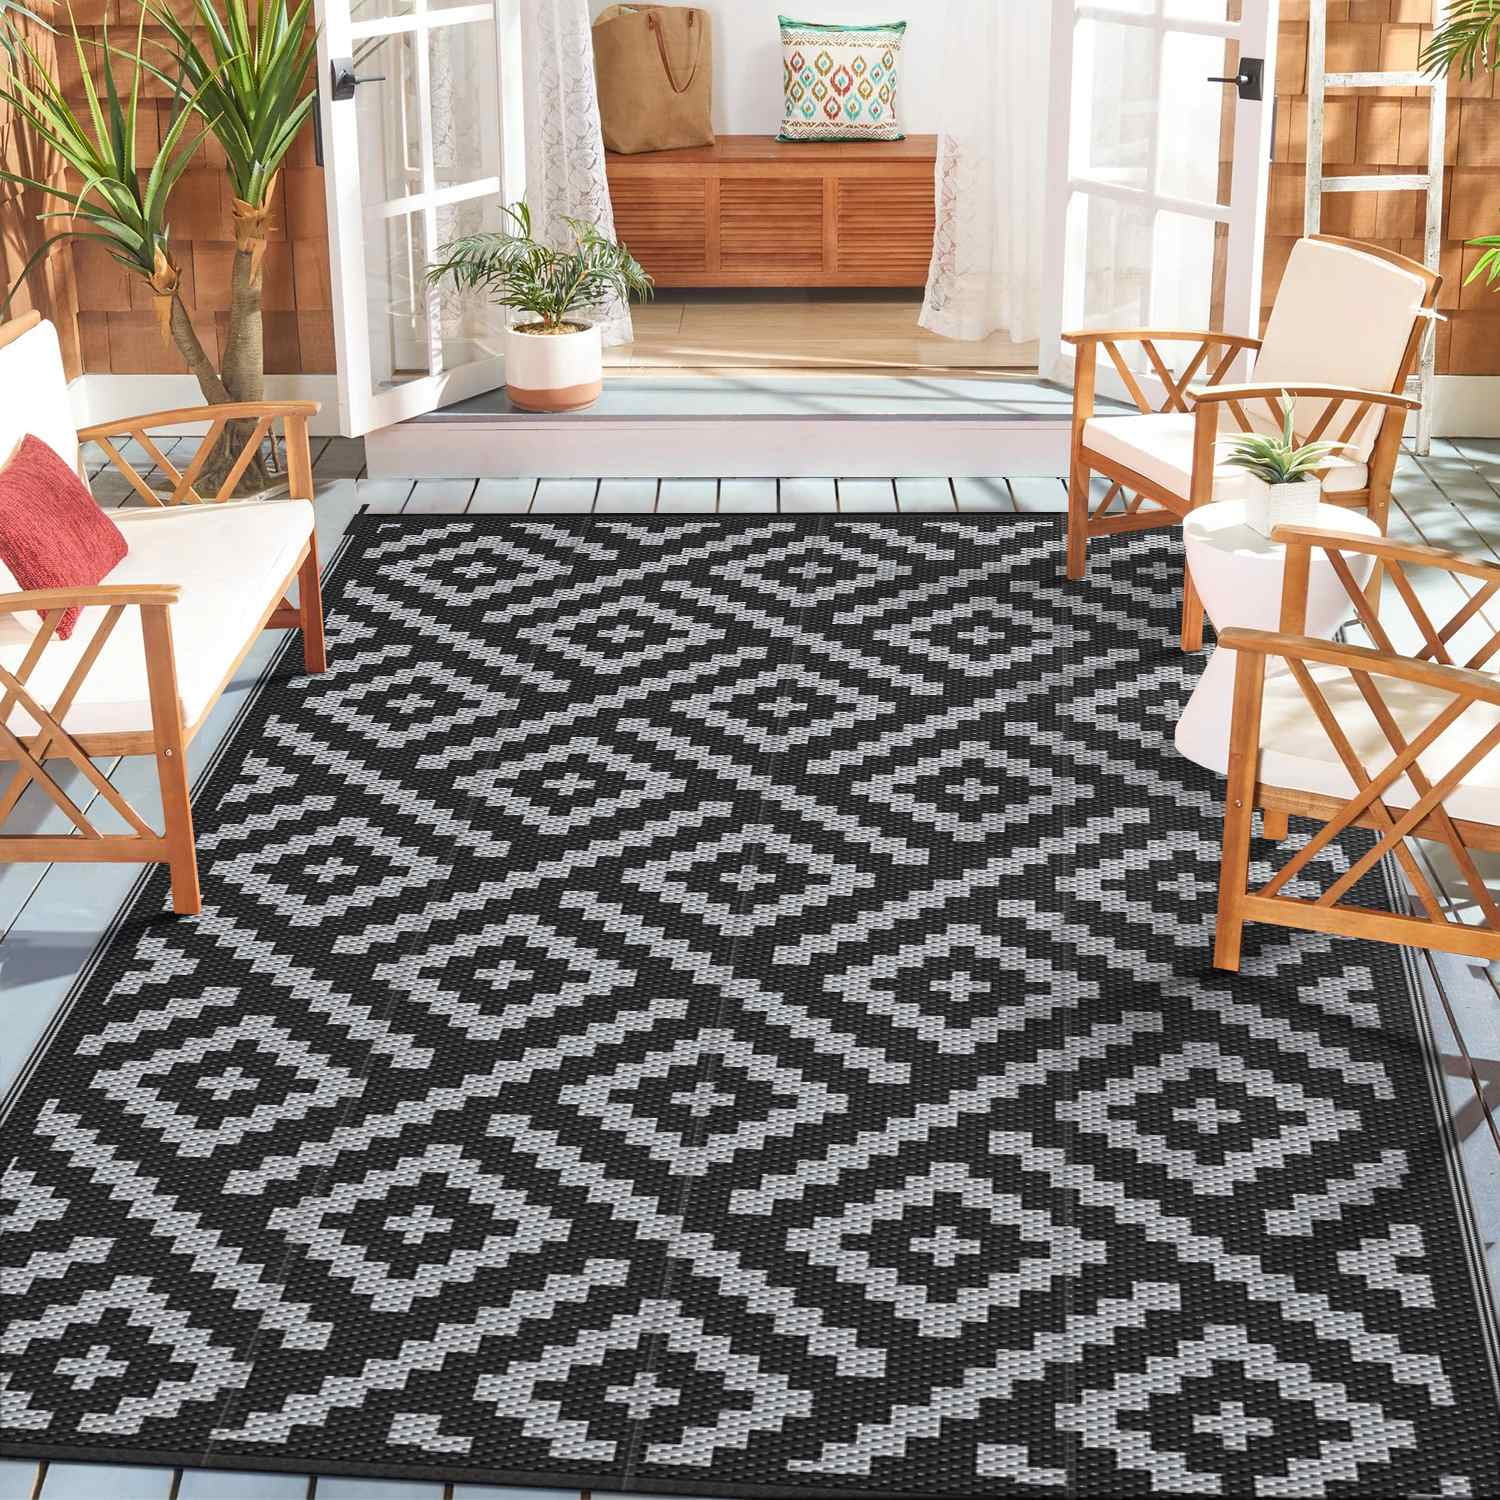 DEORAB 8x10 Outdoor Rug Waterproof, Reversible Mats, Outdoor Area Rug,  Plastic Outside Carpet, Geometric Rv Mat for Patio,Camping, gray&white 